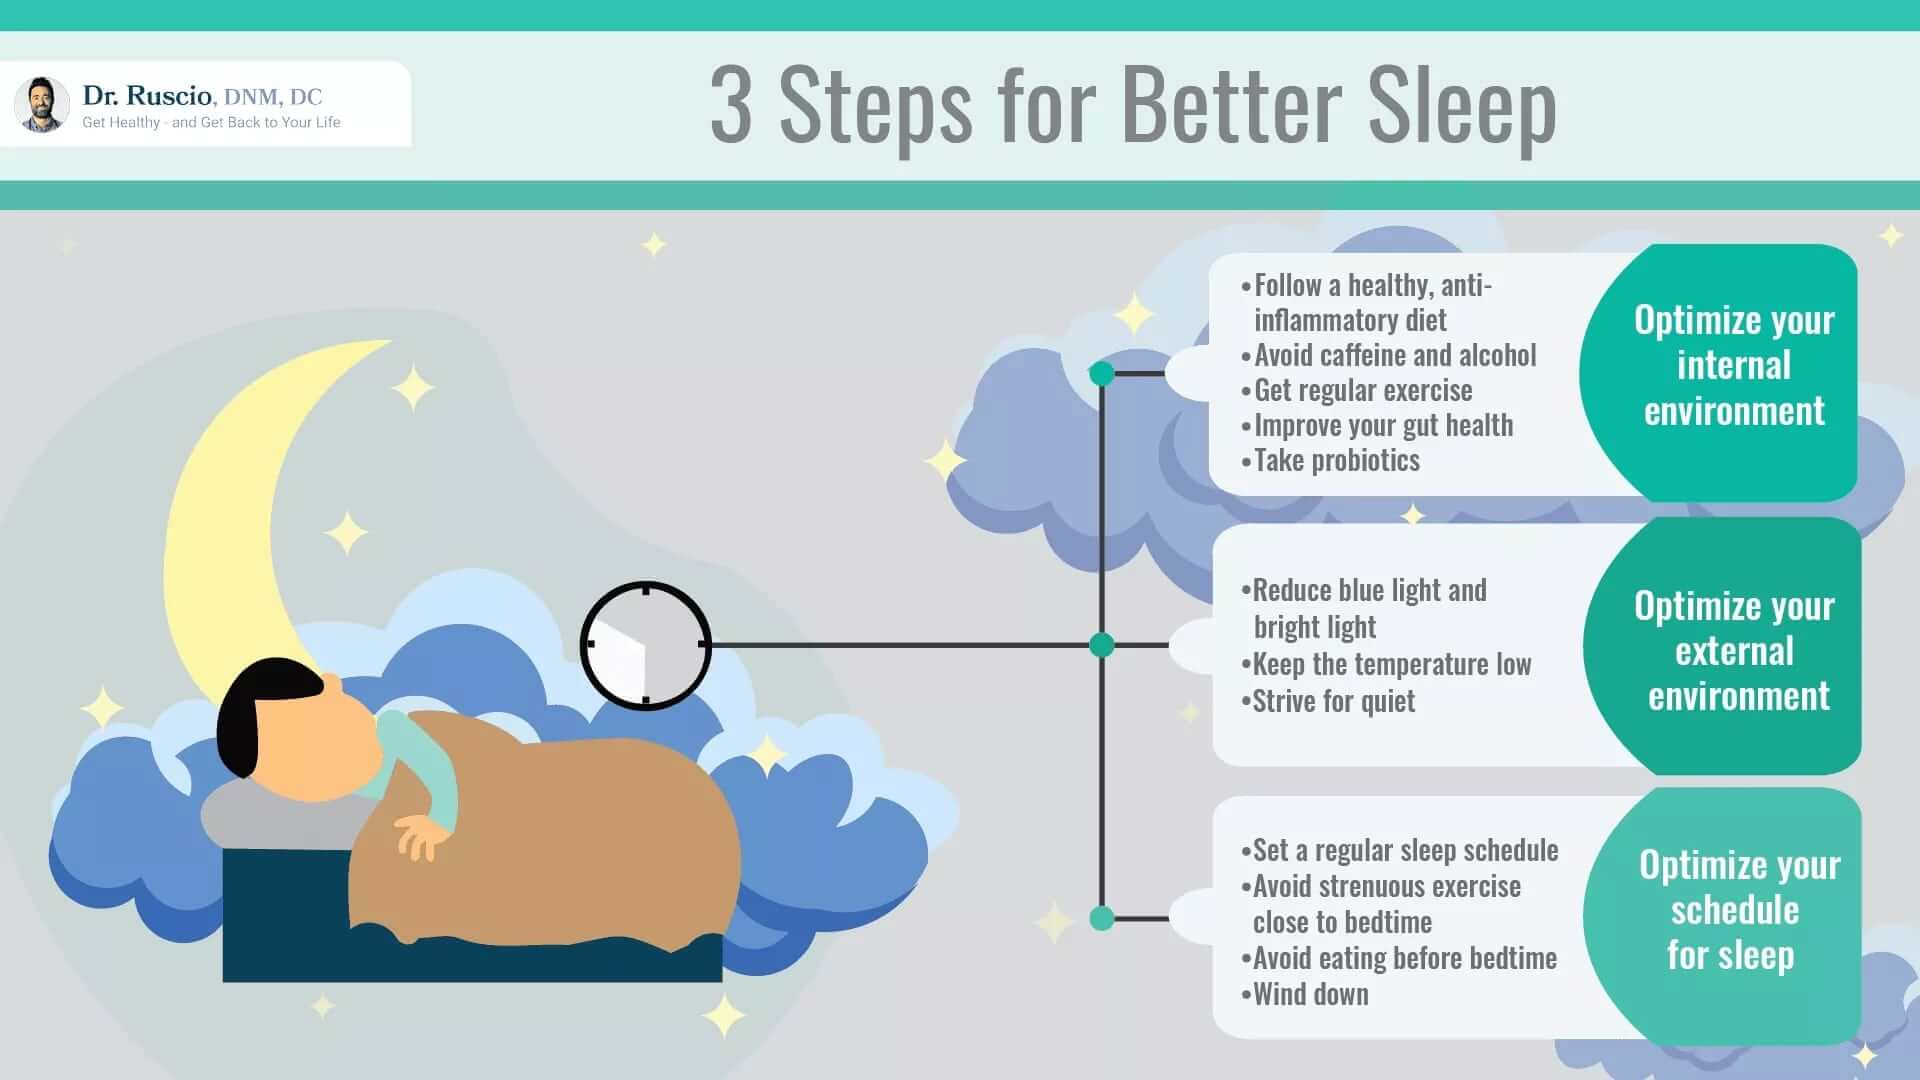 3 Steps for Better Sleep infographic by Dr. Ruscio